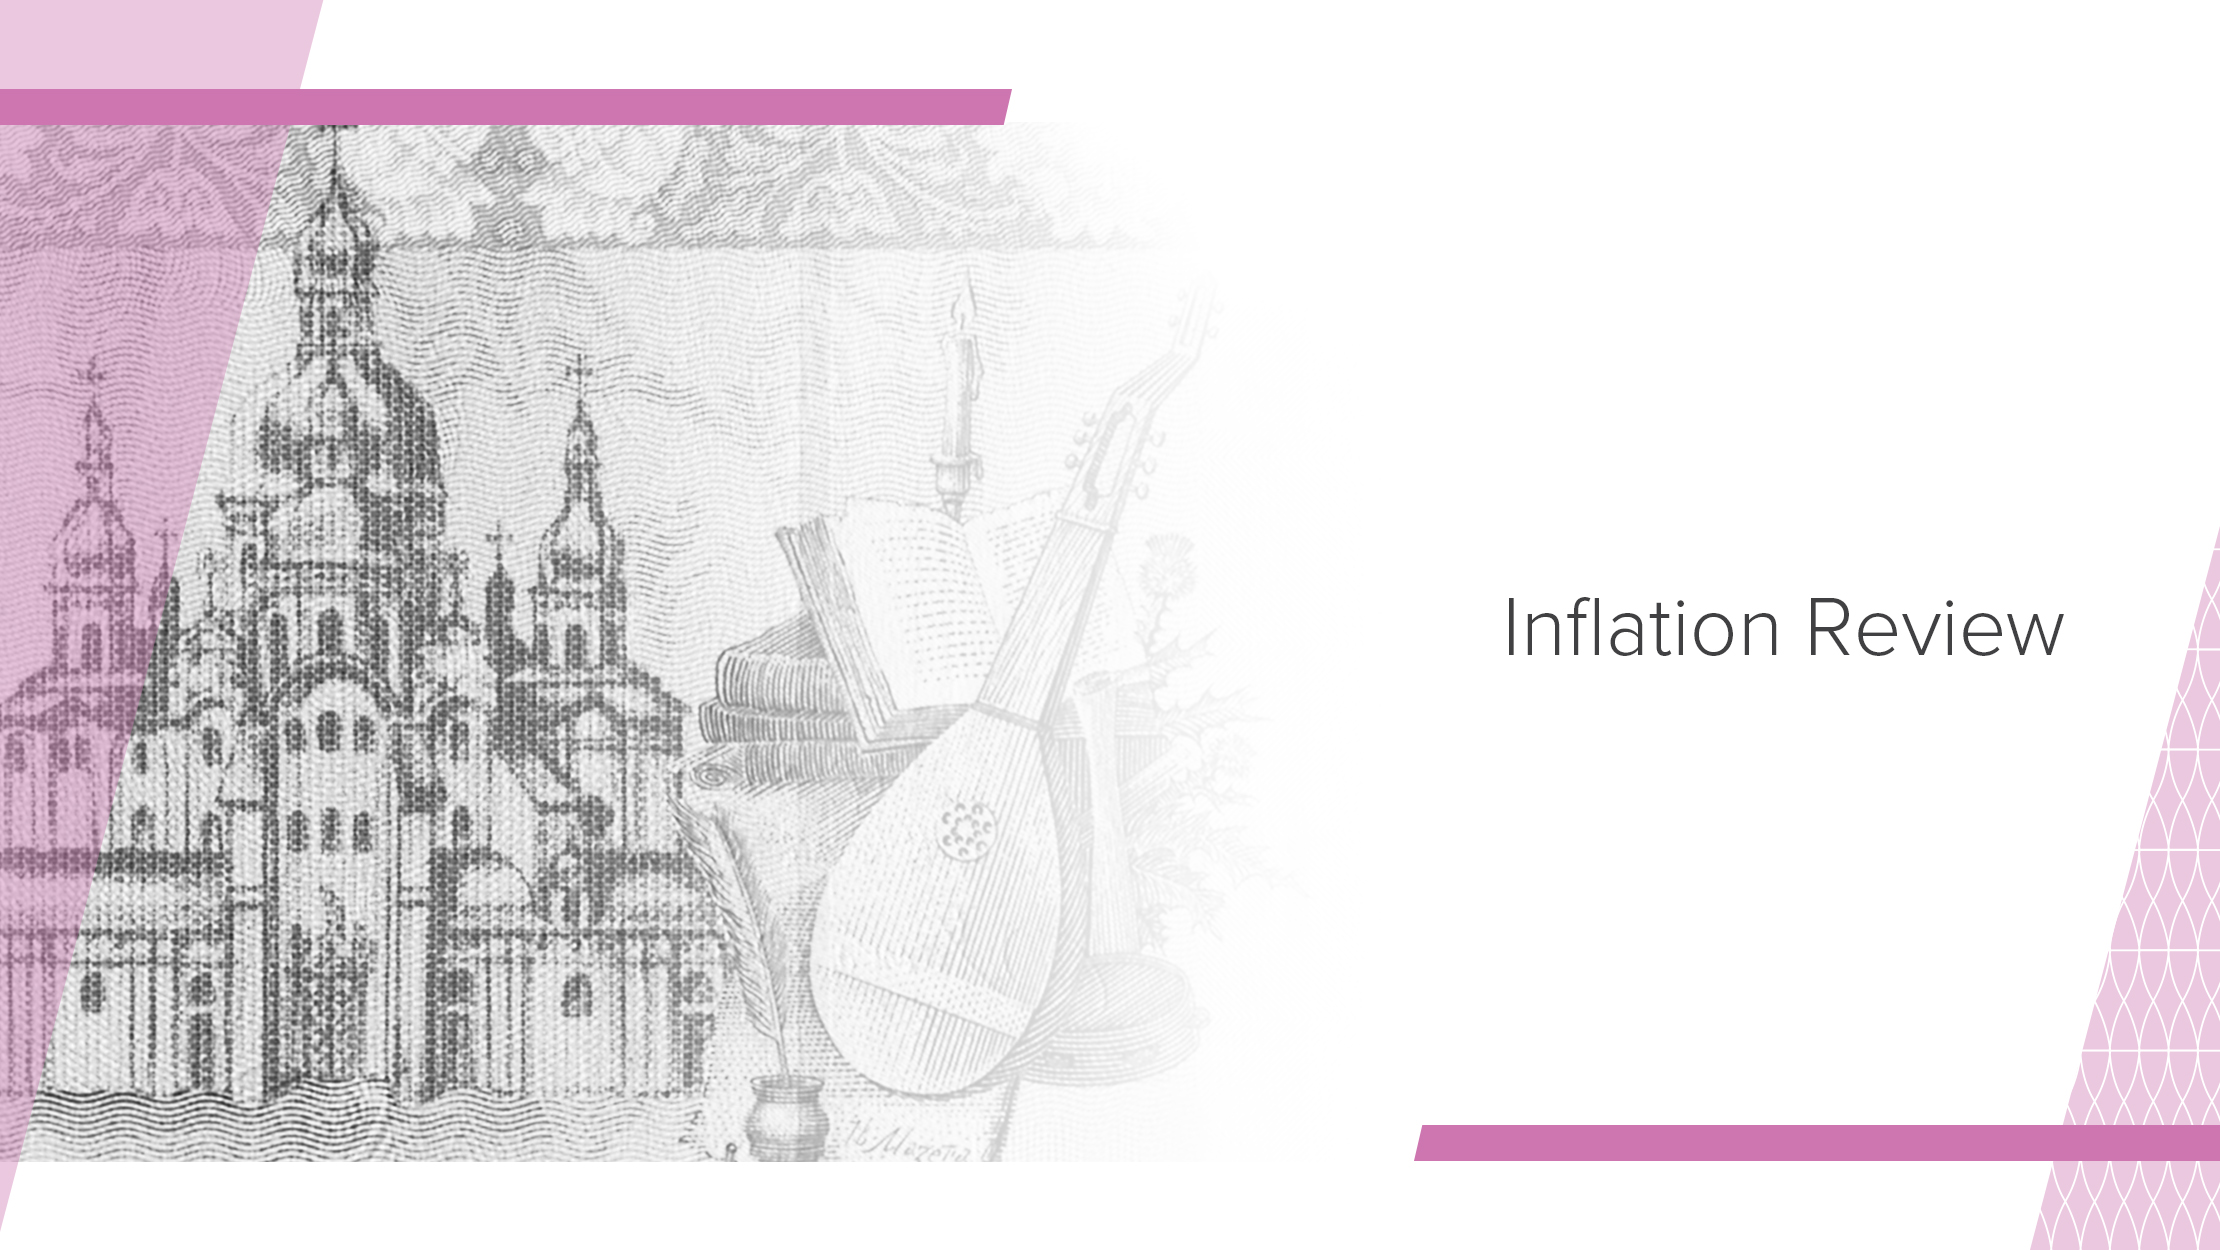 Inflation Review, June 2017